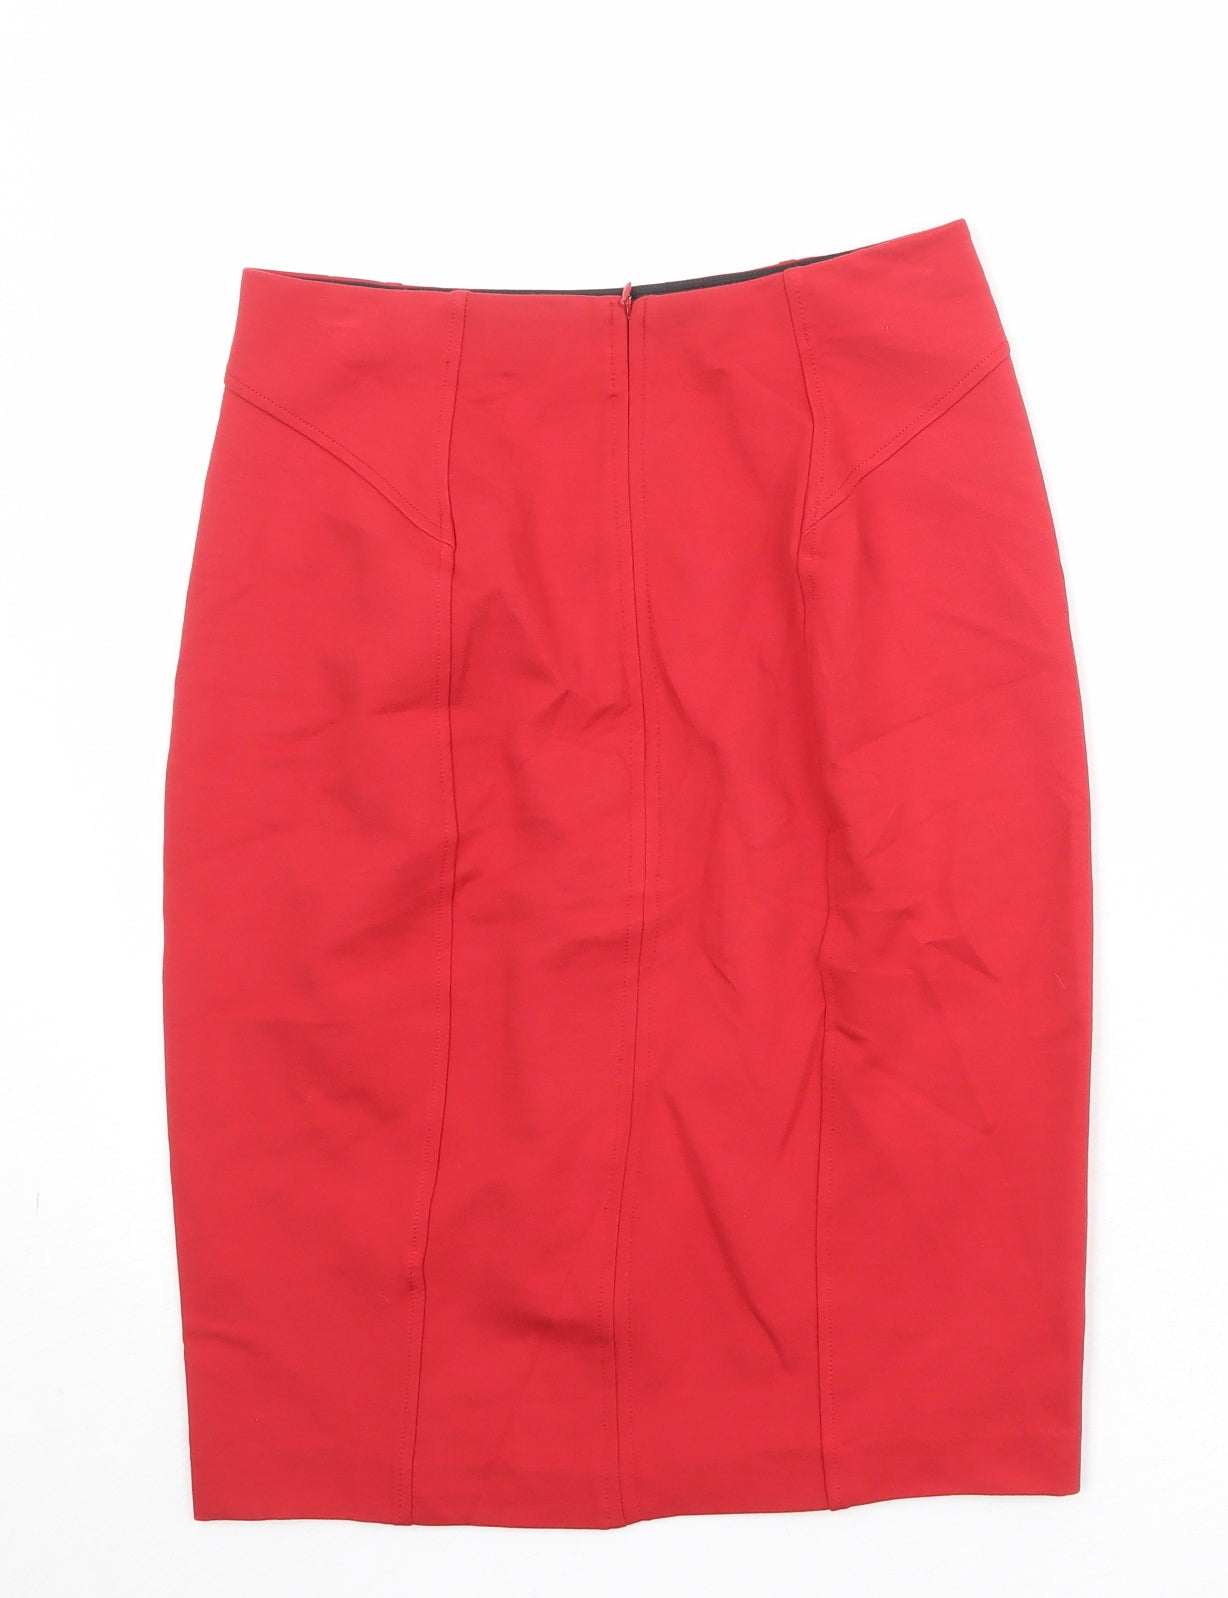 Premise Womens Red Viscose Straight & Pencil Skirt Size S Zip